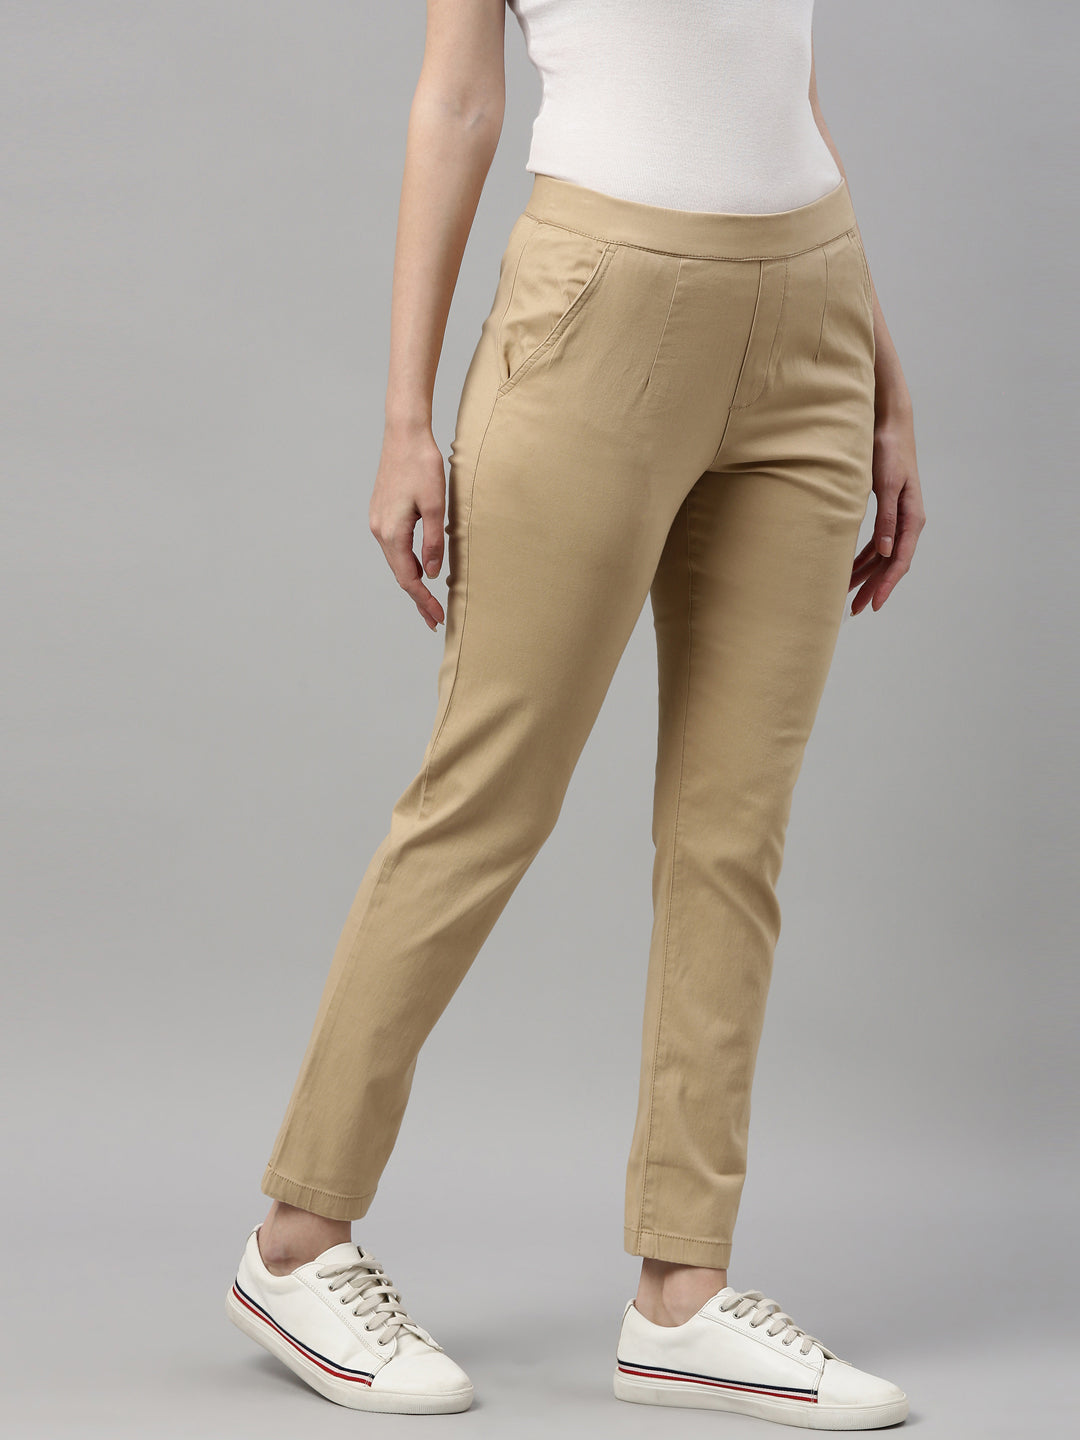 Buy Genuine German Army Issue Moleskin Pants Field Combat BW Khaki Beige Color  Trousers NEW Online in India - Etsy